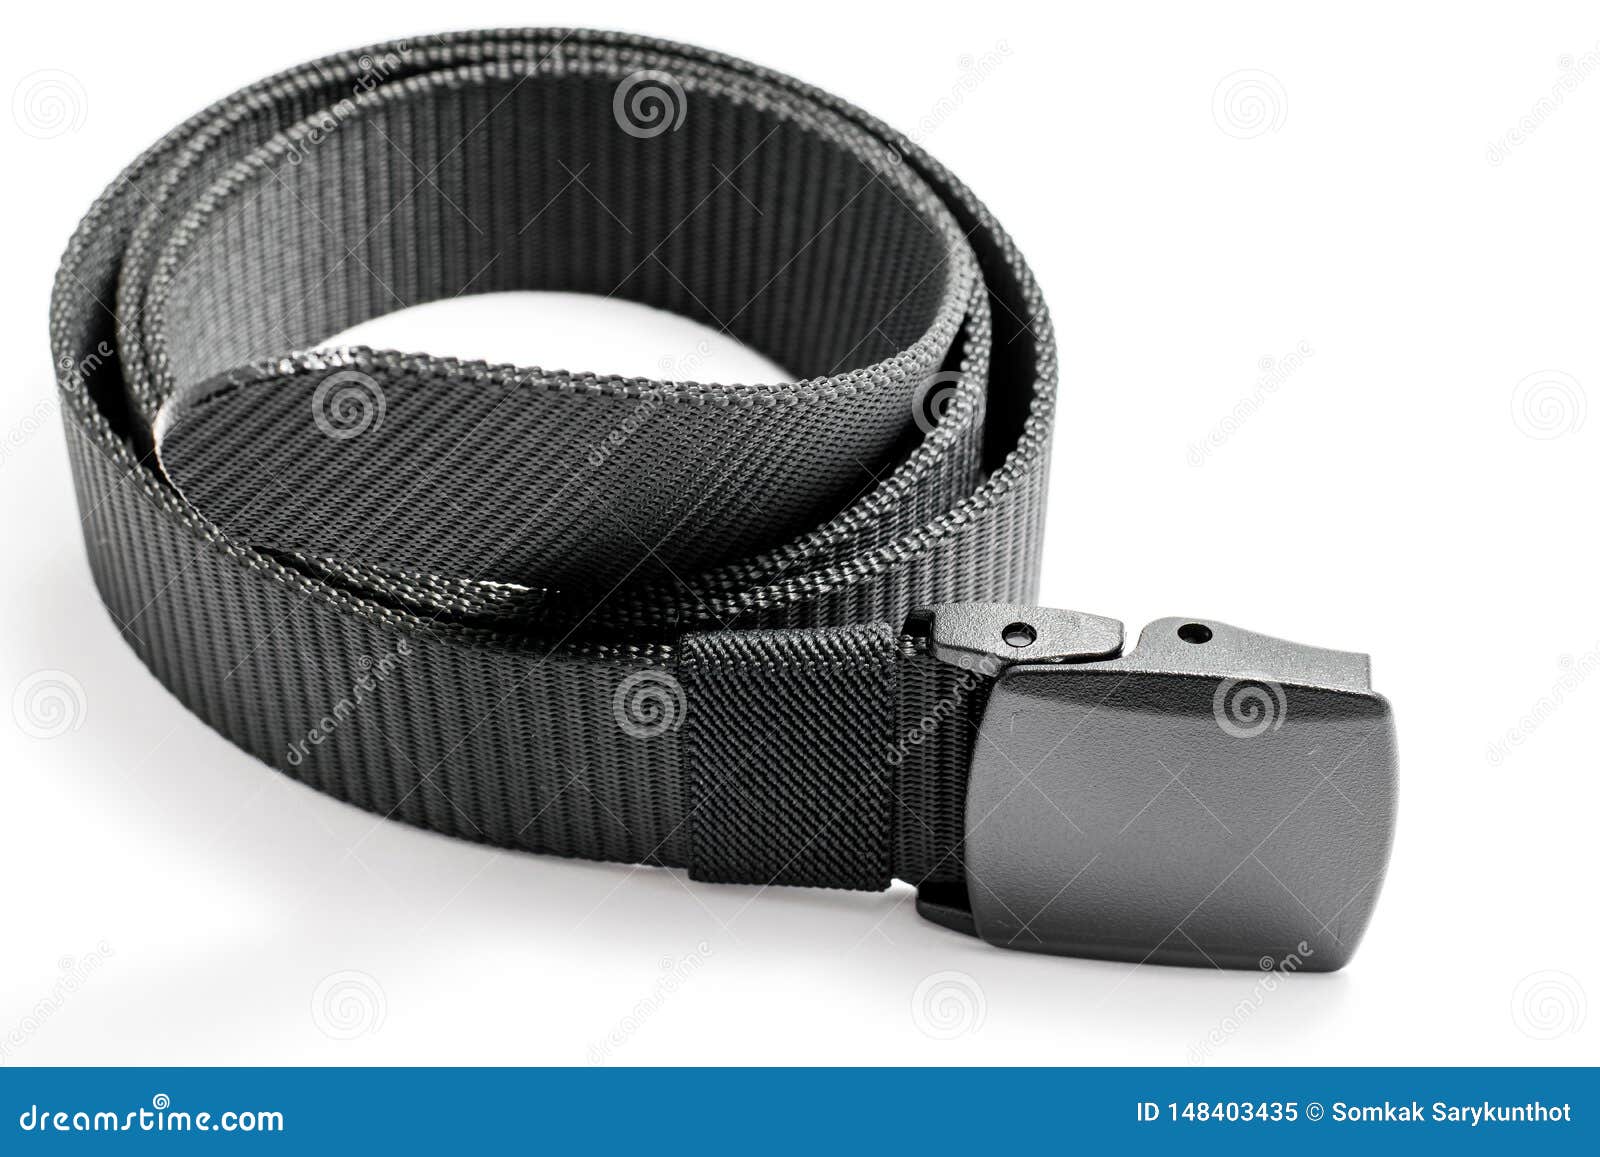 Military tactical belt stock image. Image of buckle - 148403435